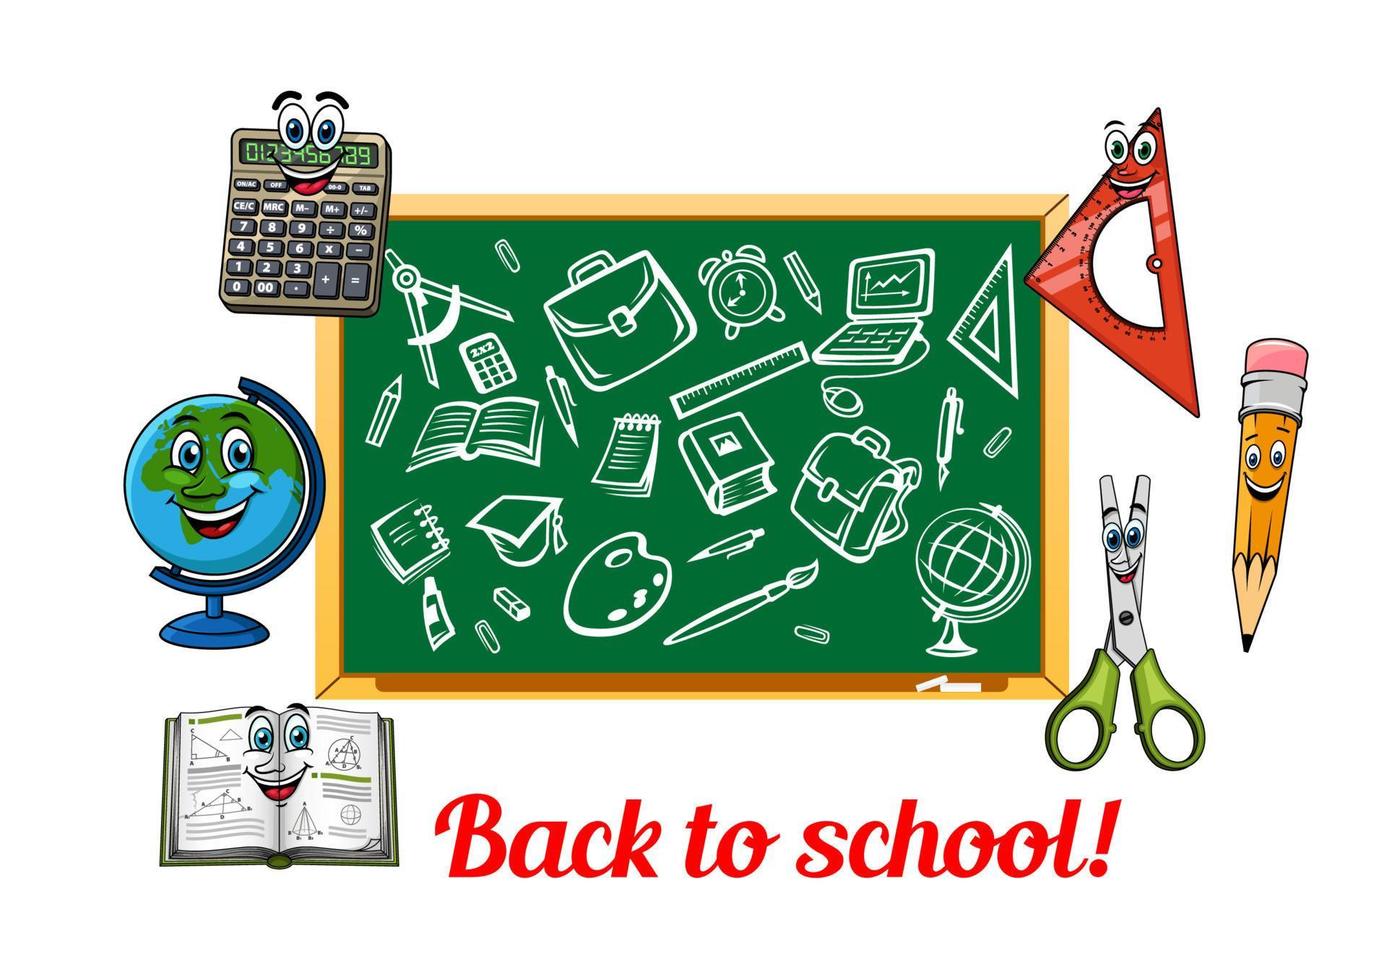 Back to school theme design with stationery items vector